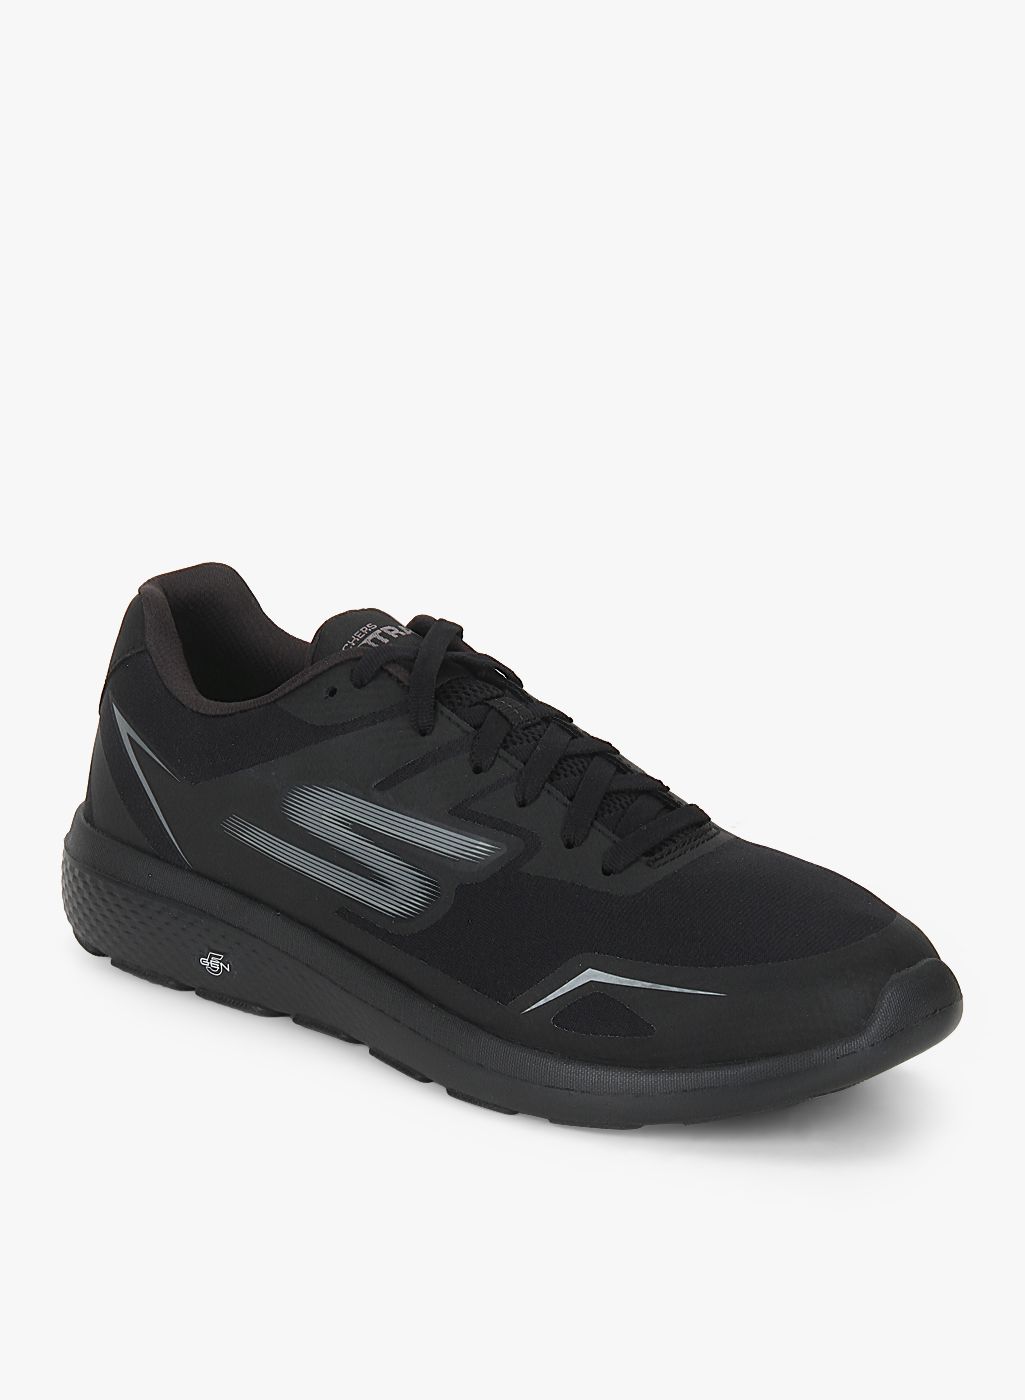 Skechers Black Training Or Gym Shoes 